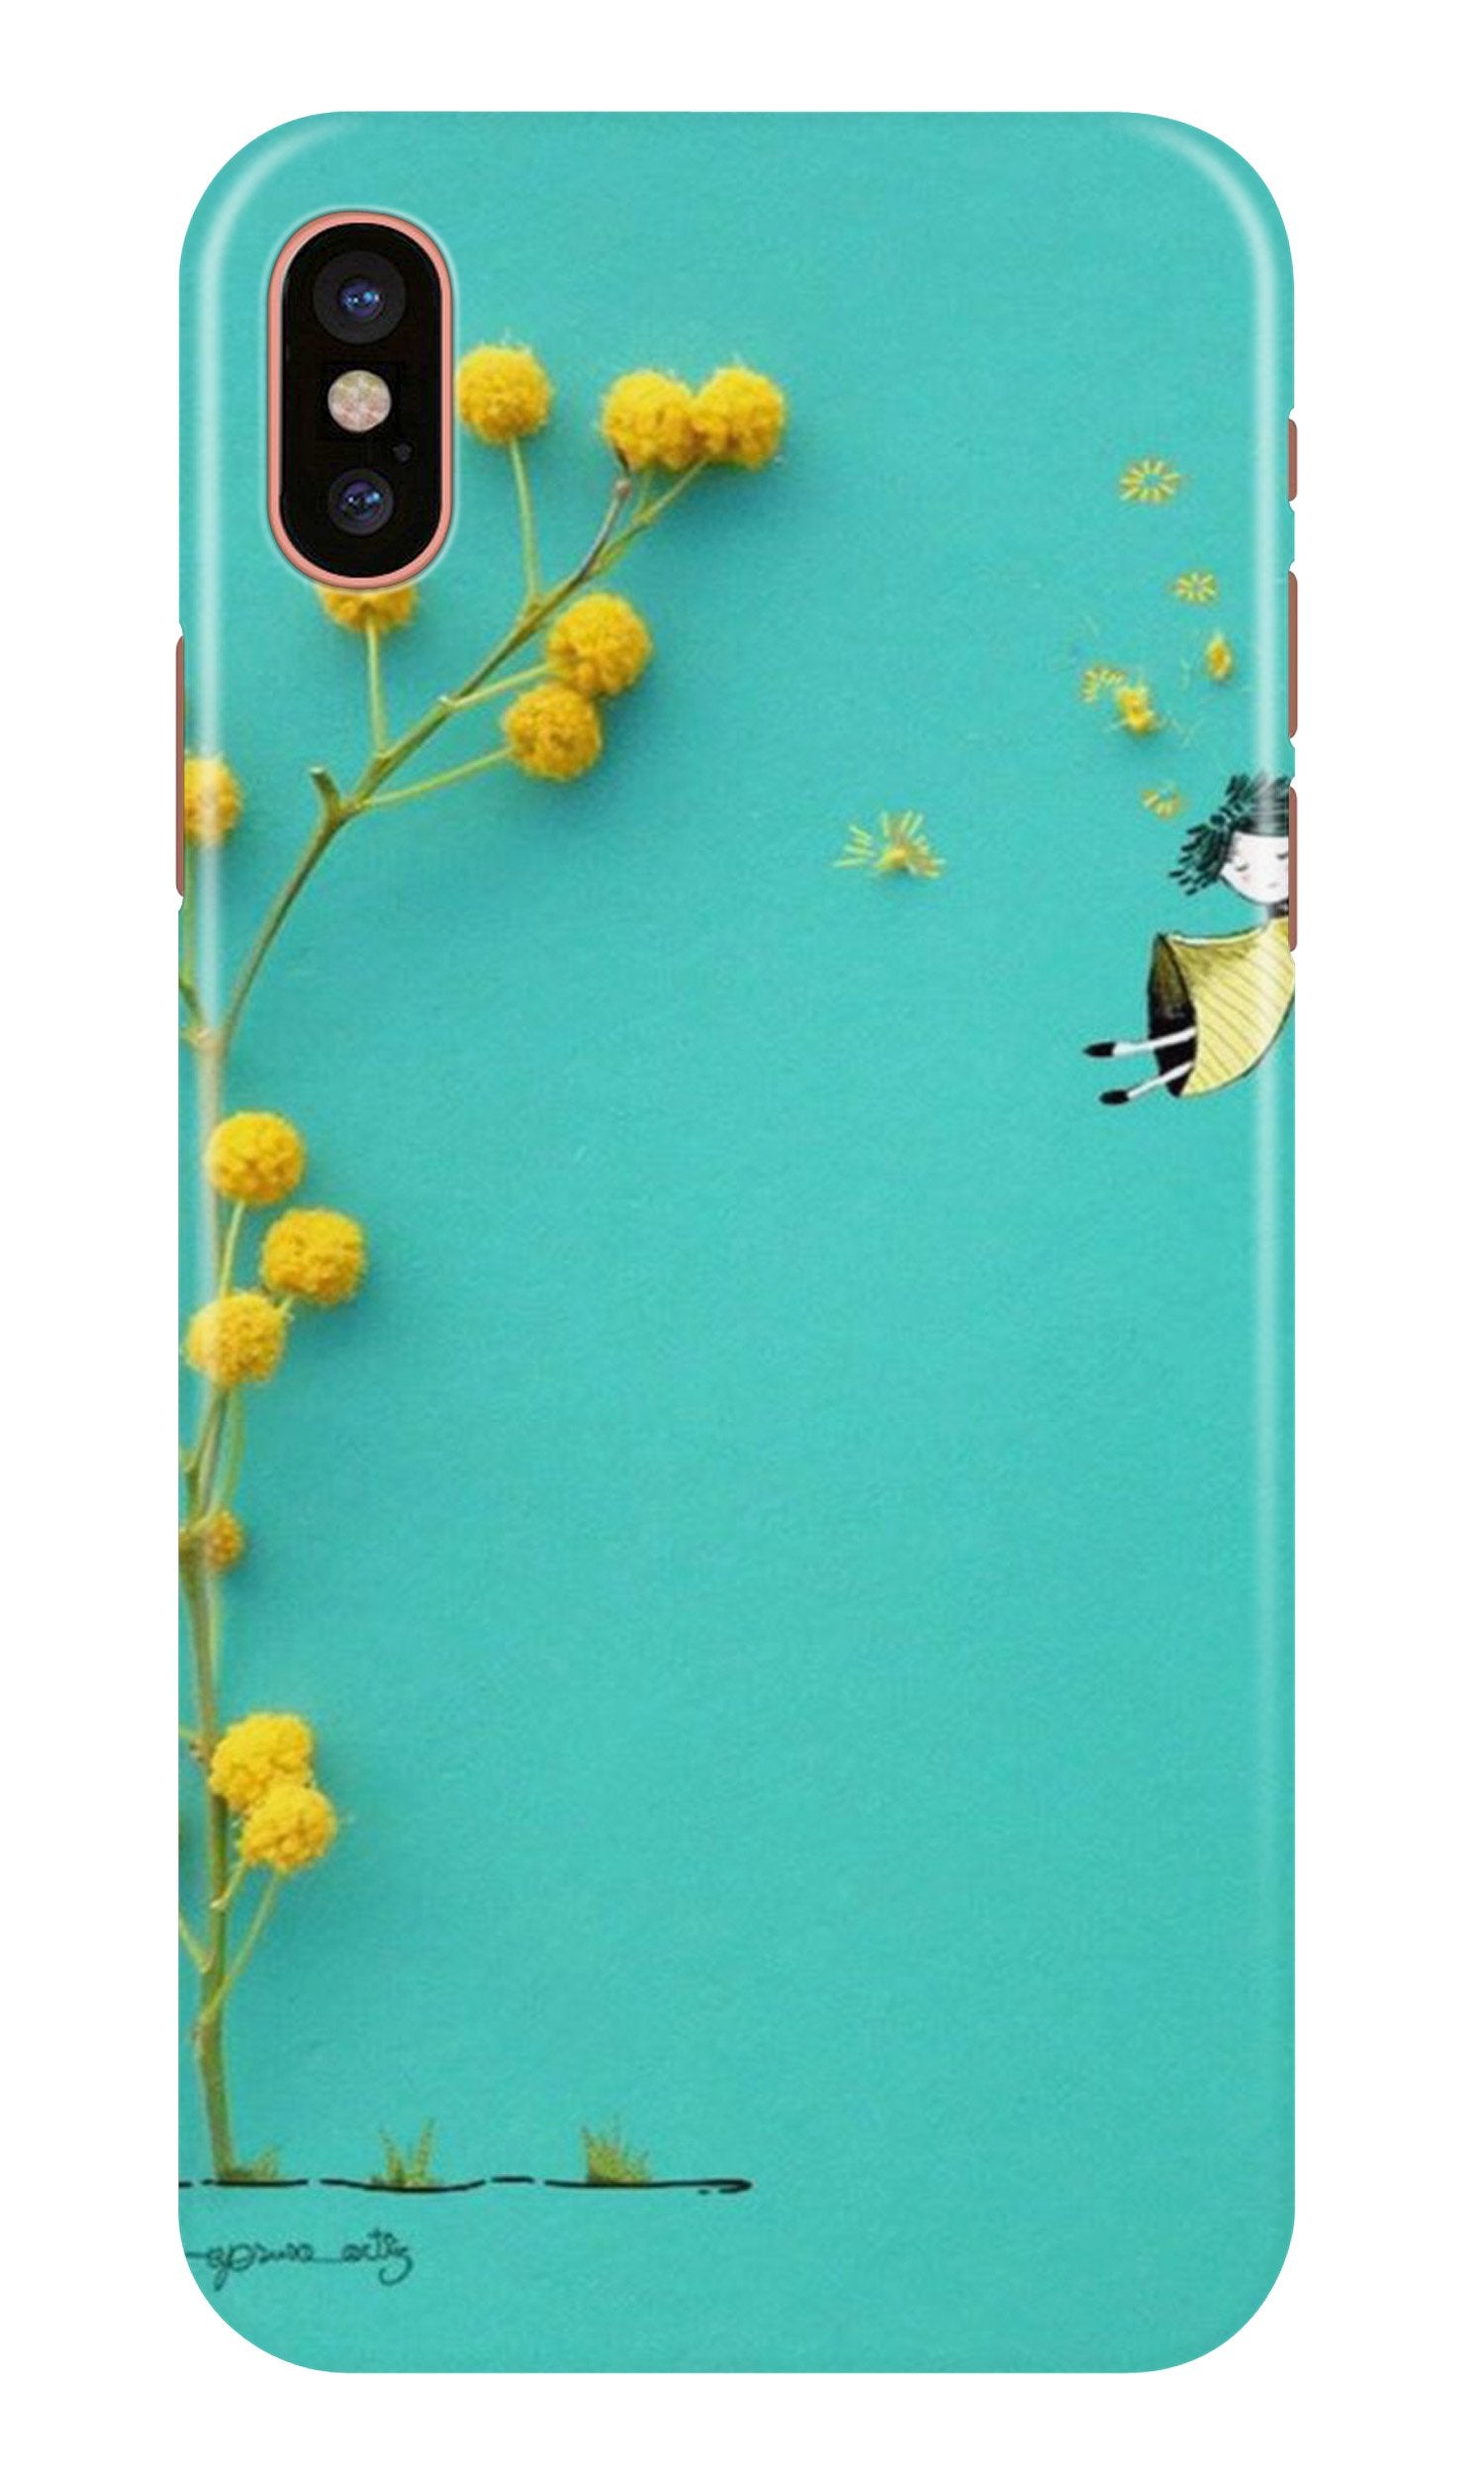 Flowers Girl Case for iPhone Xr (Design No. 216)